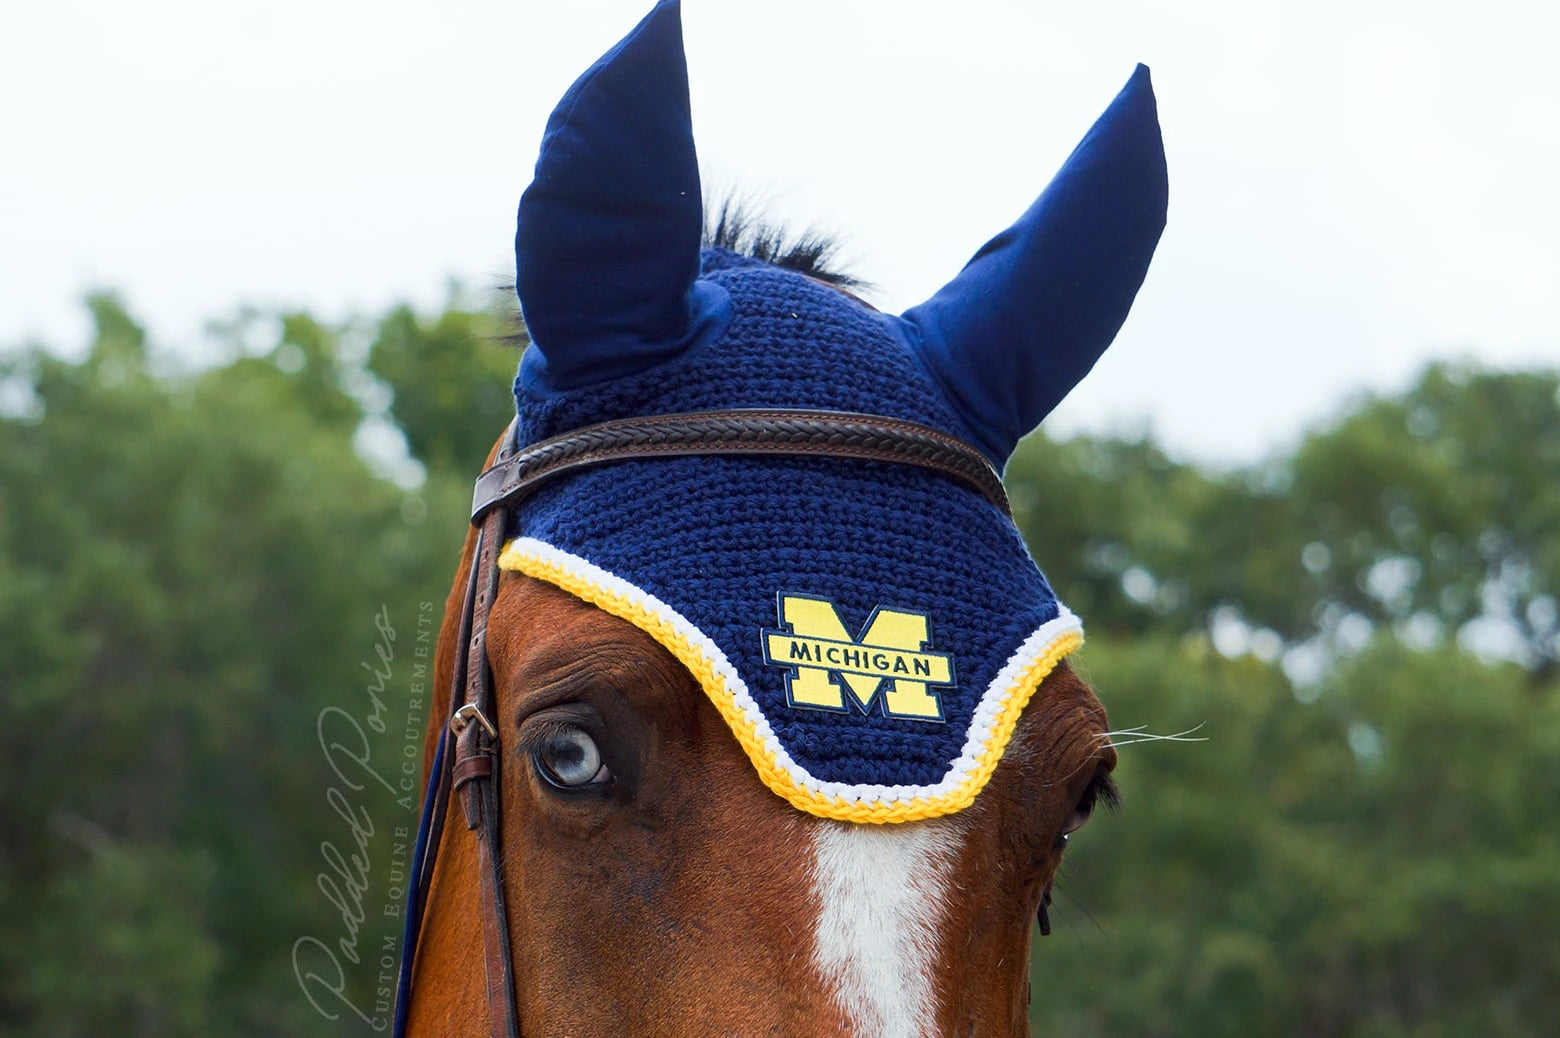 Navy Blue and Yellow University of Michigan Patch Fly Veil Bonnet